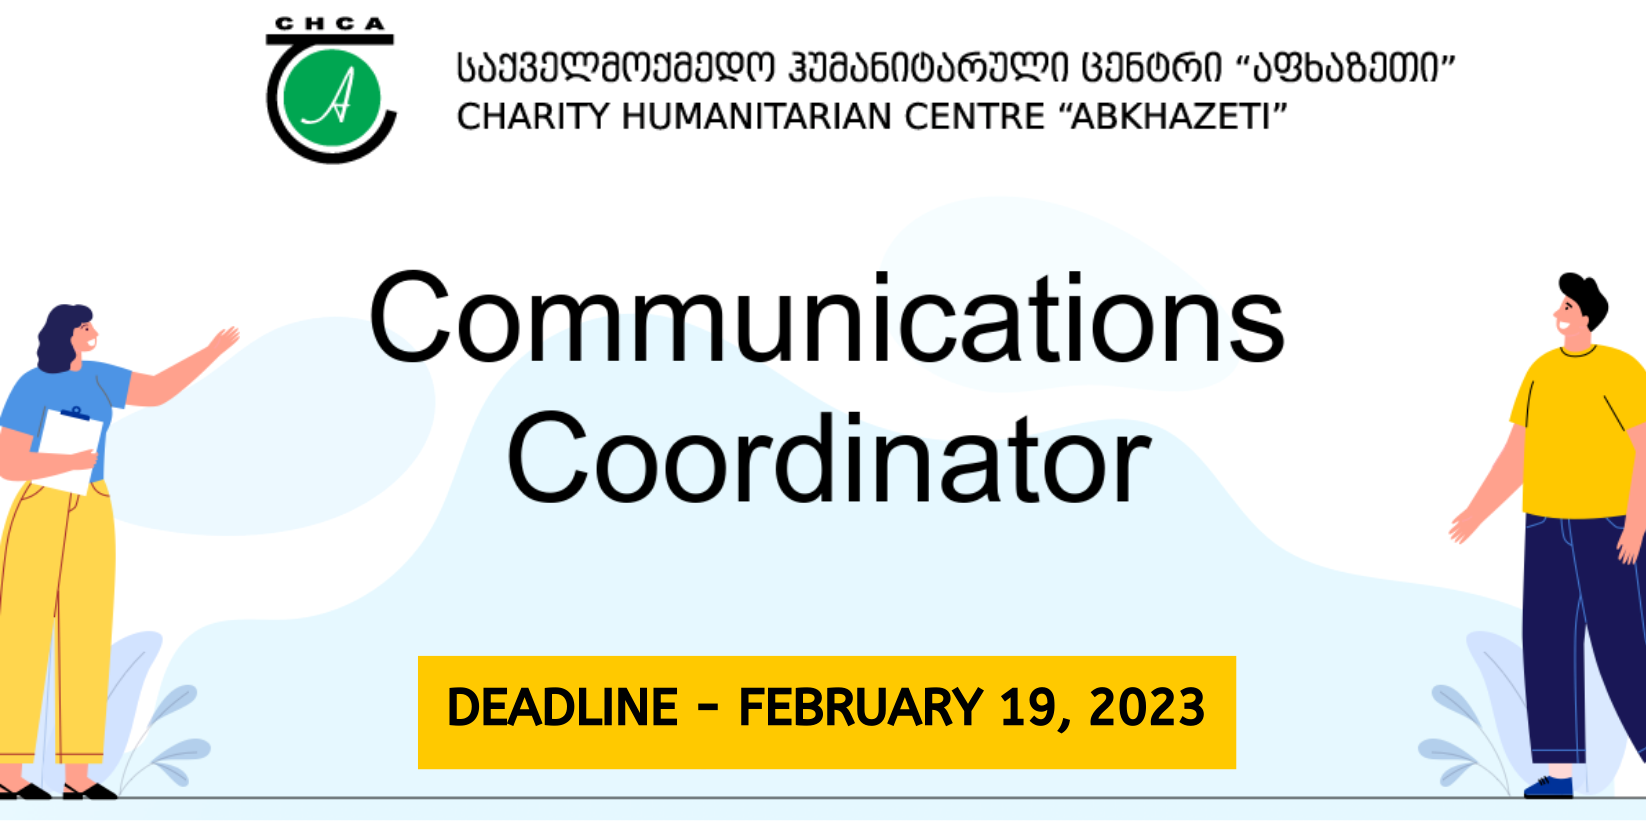 CHCA is looking for a Communications Coordinator 